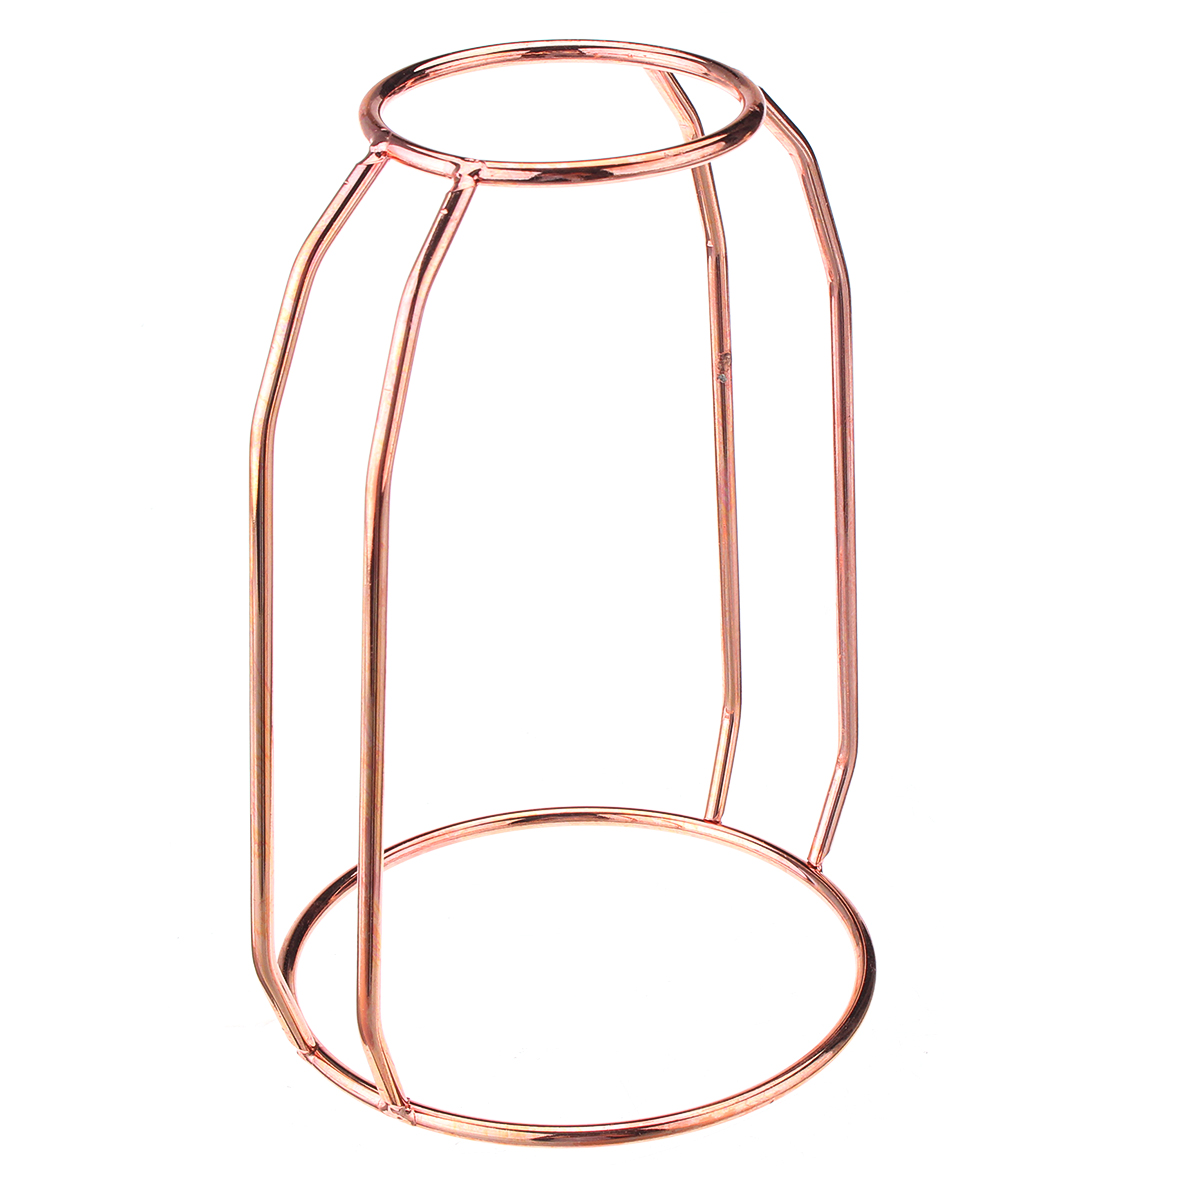 Glass-Vase-Flower-Holder-Plant-Container-Metal-Line-for-Decorations-1450433-5